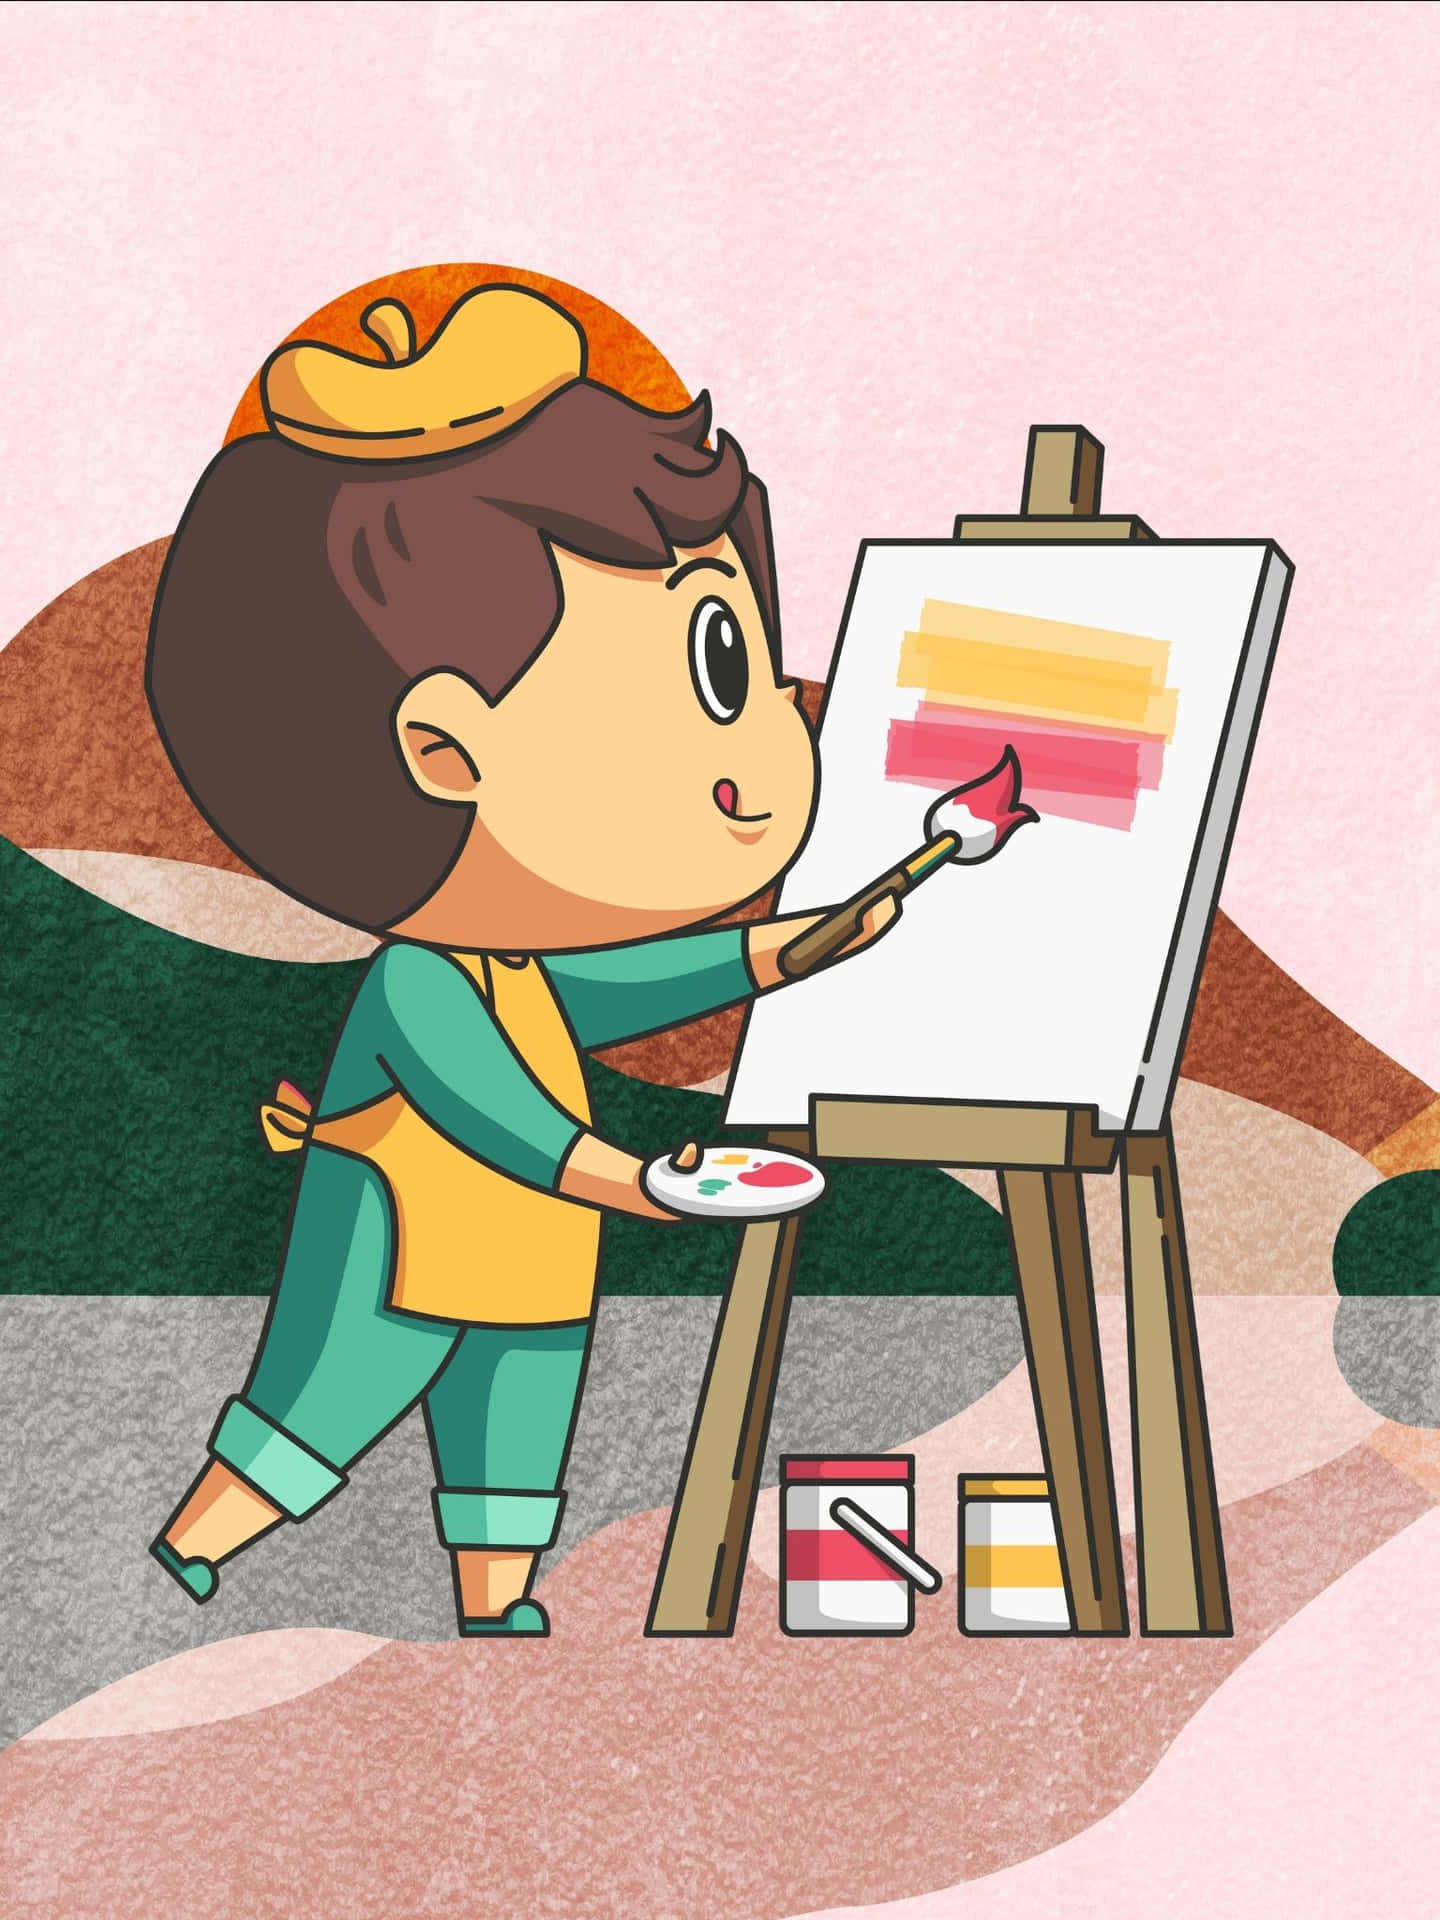 A Cartoon Illustration Of A Girl Painting On An Easel Background